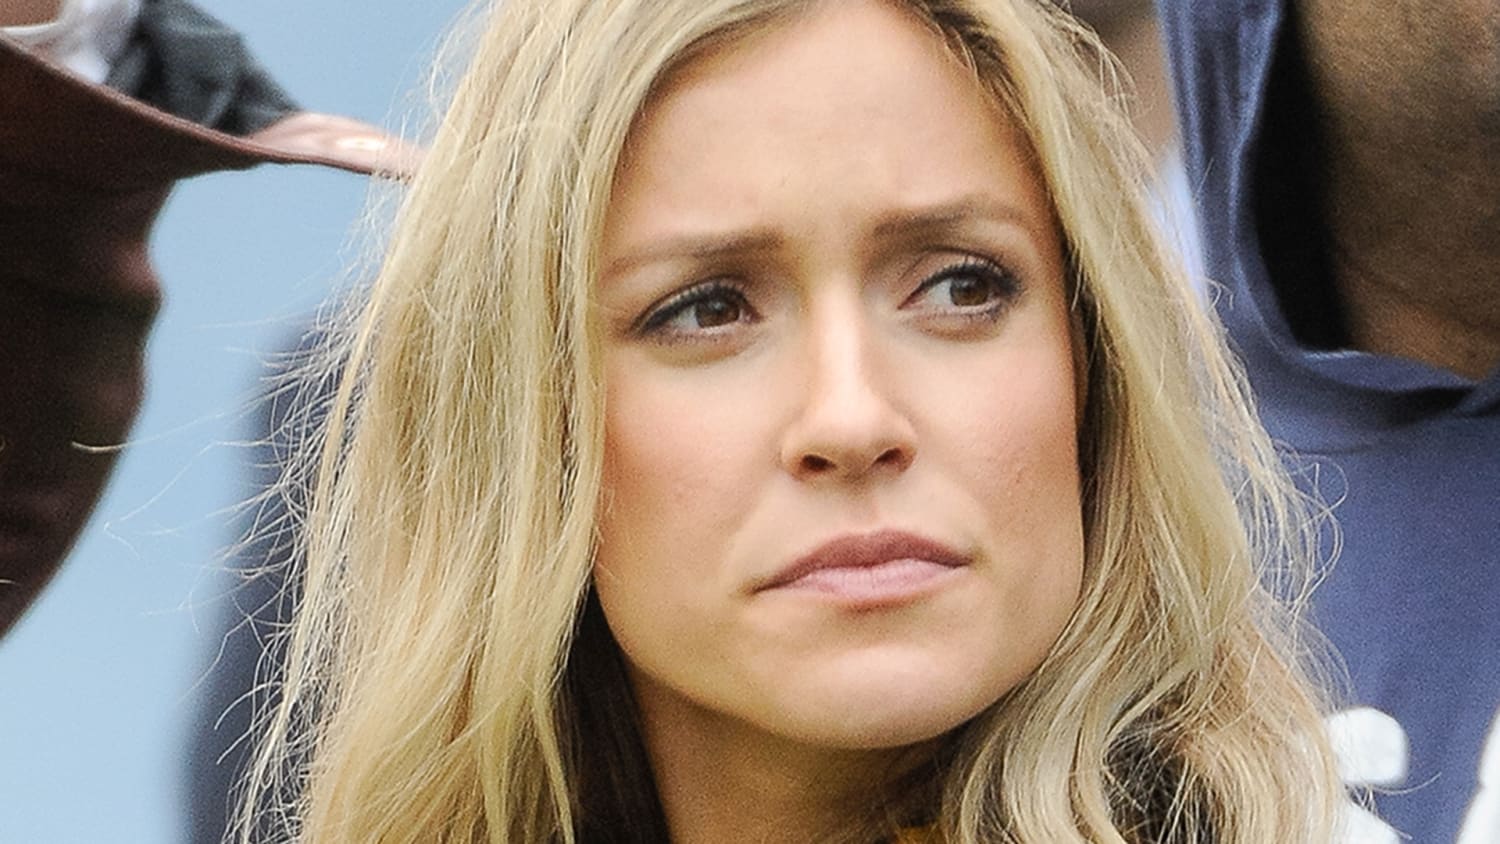 Kristin Cavallari speaks out about baby after car accident.